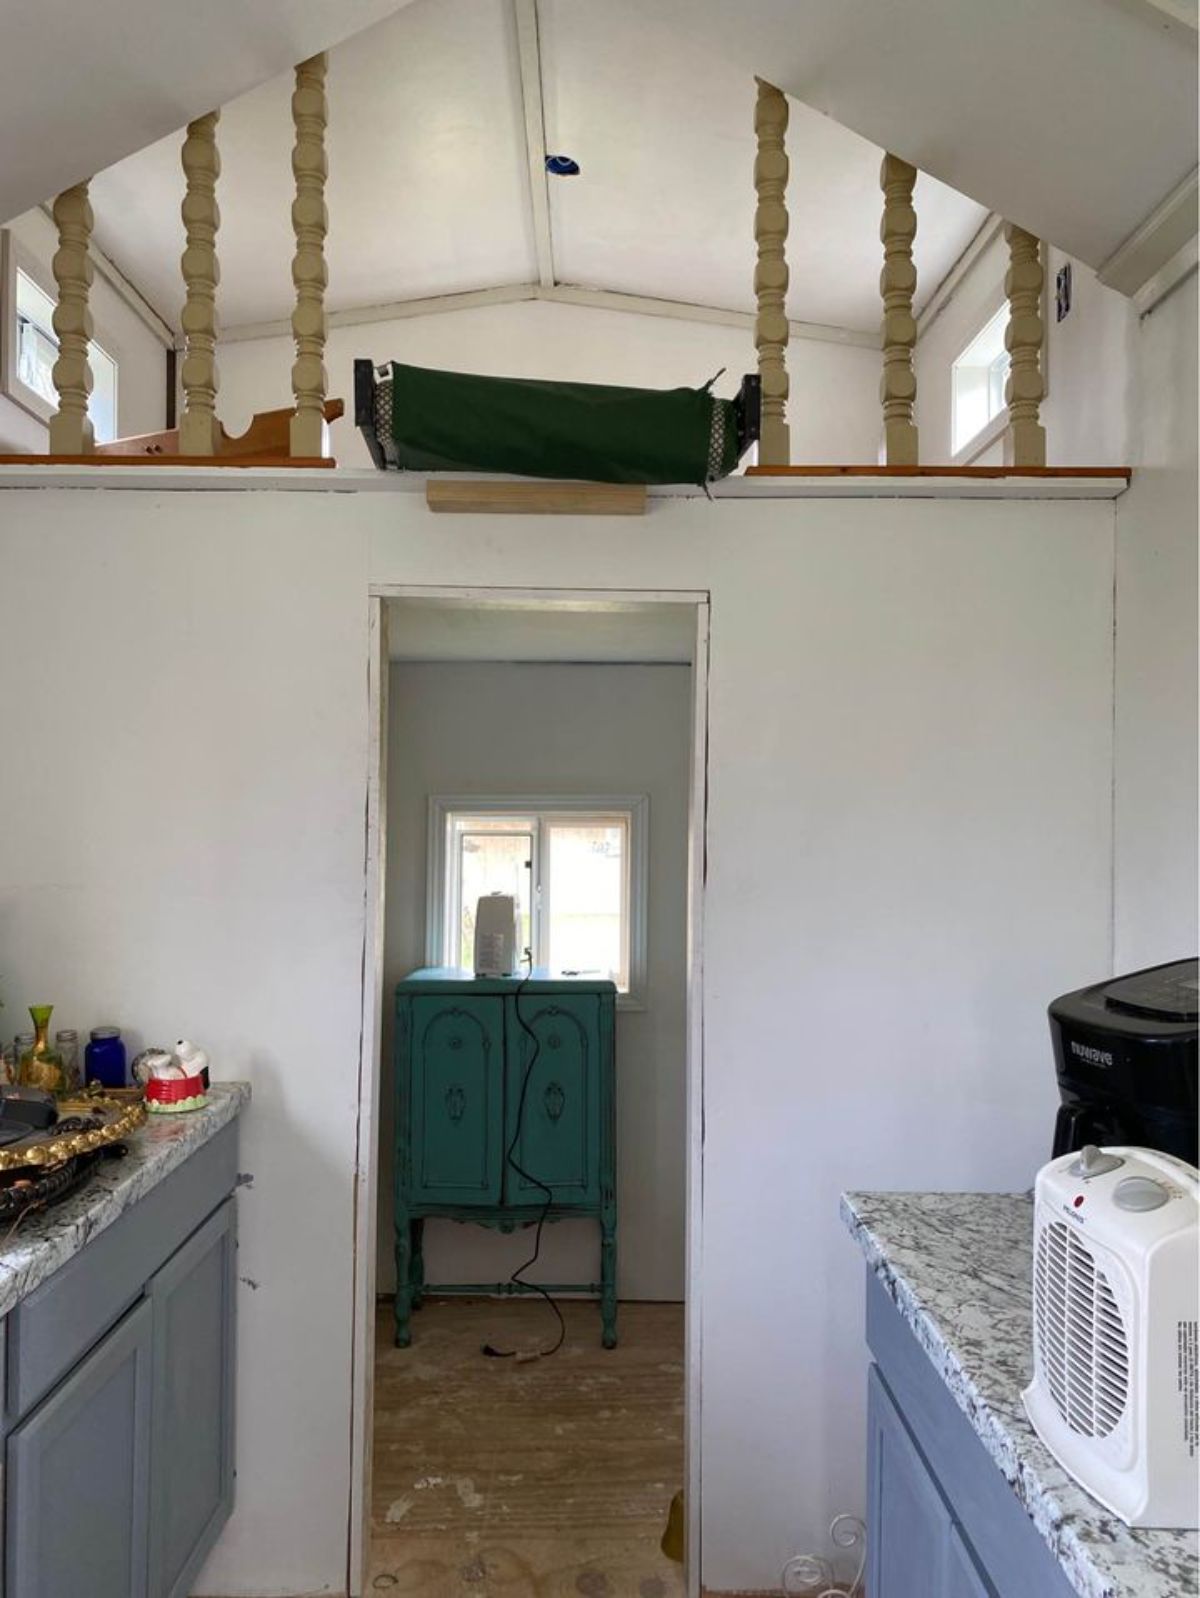 The loft of 20’ Tiny House on Trailer is accessible through ladder